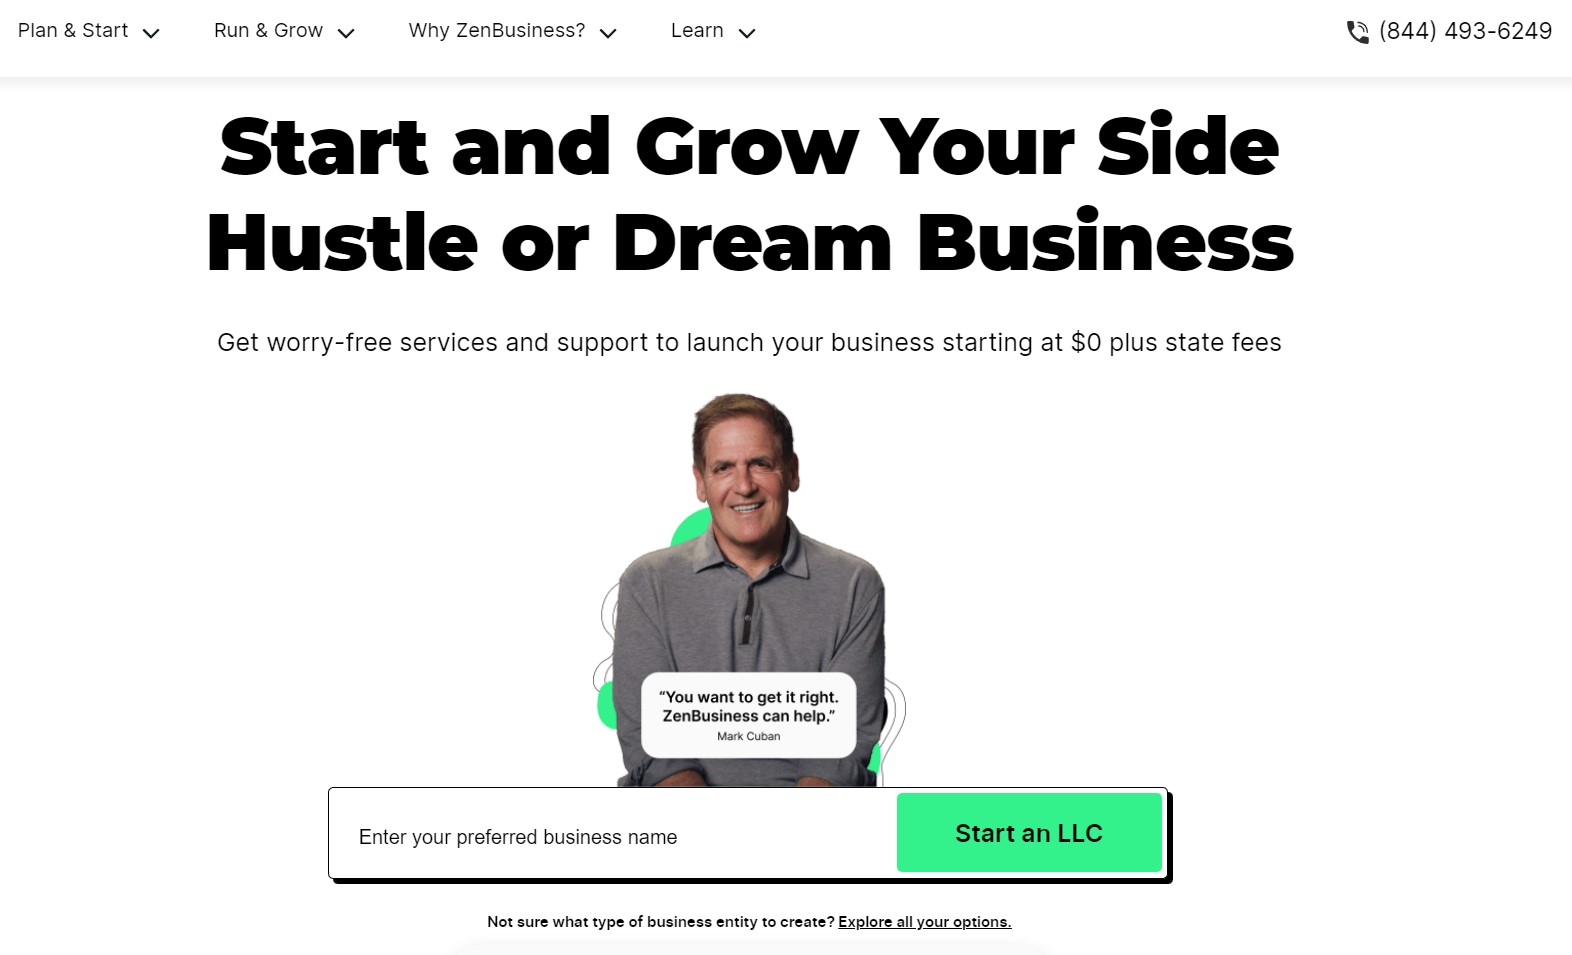 ZenBusiness homepage with preferred business name text field to get started